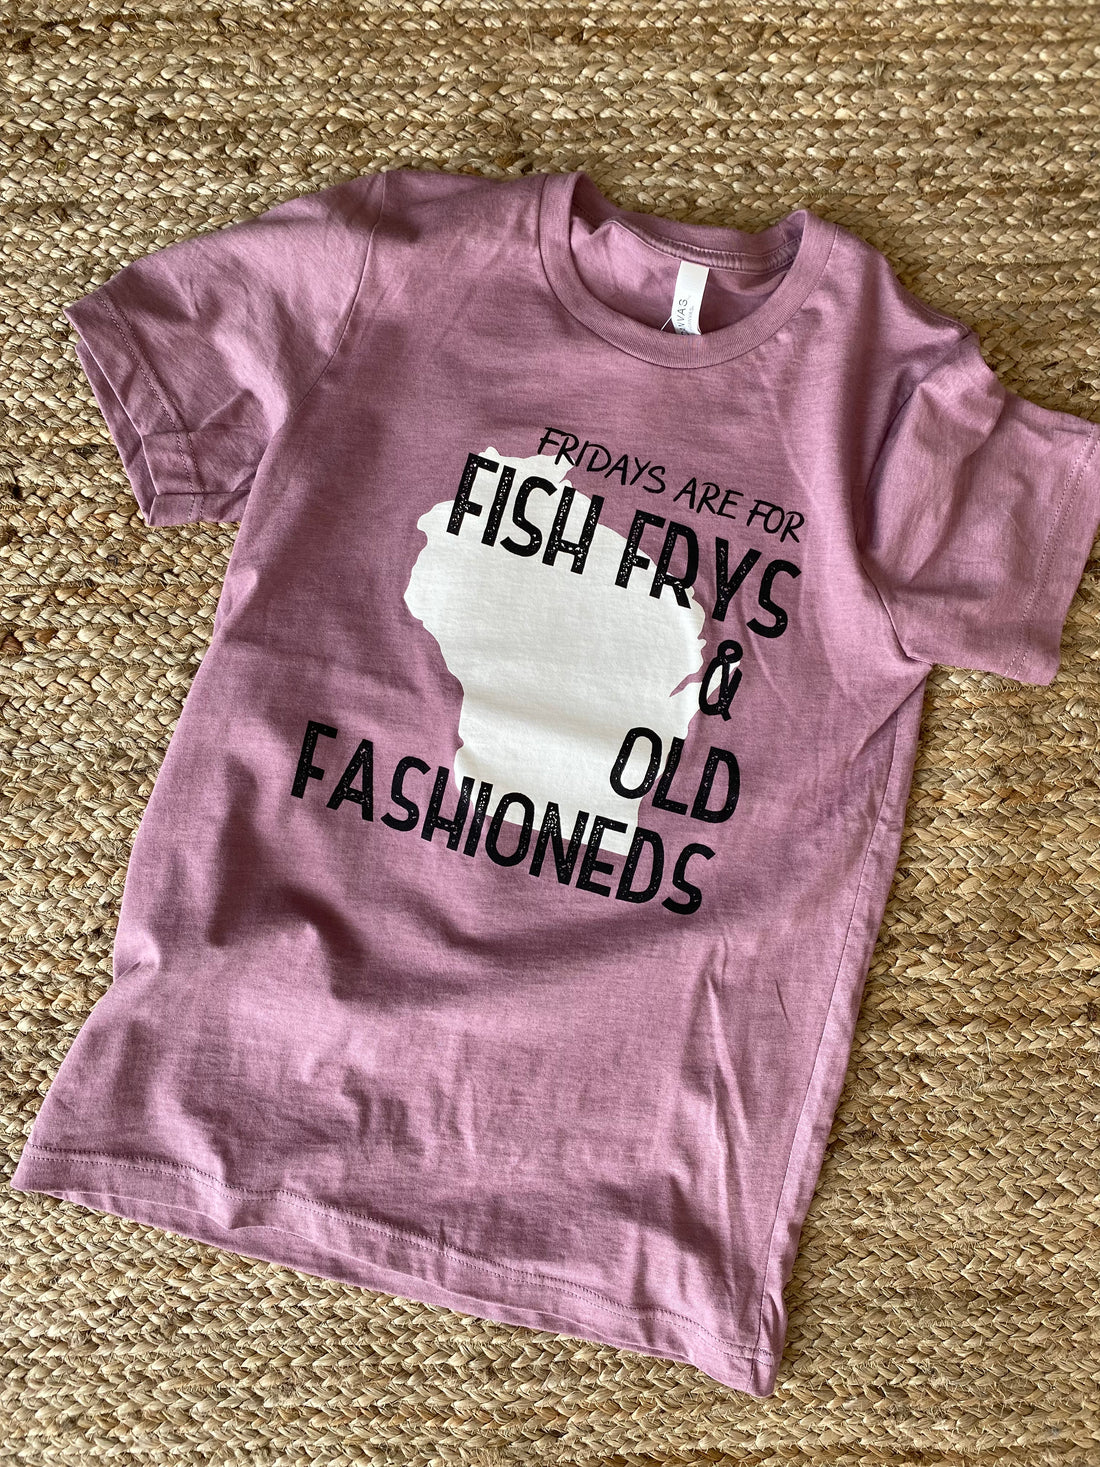 Fridays are for Fish Frys and Old Fashioneds Purple Tee - Unisex!